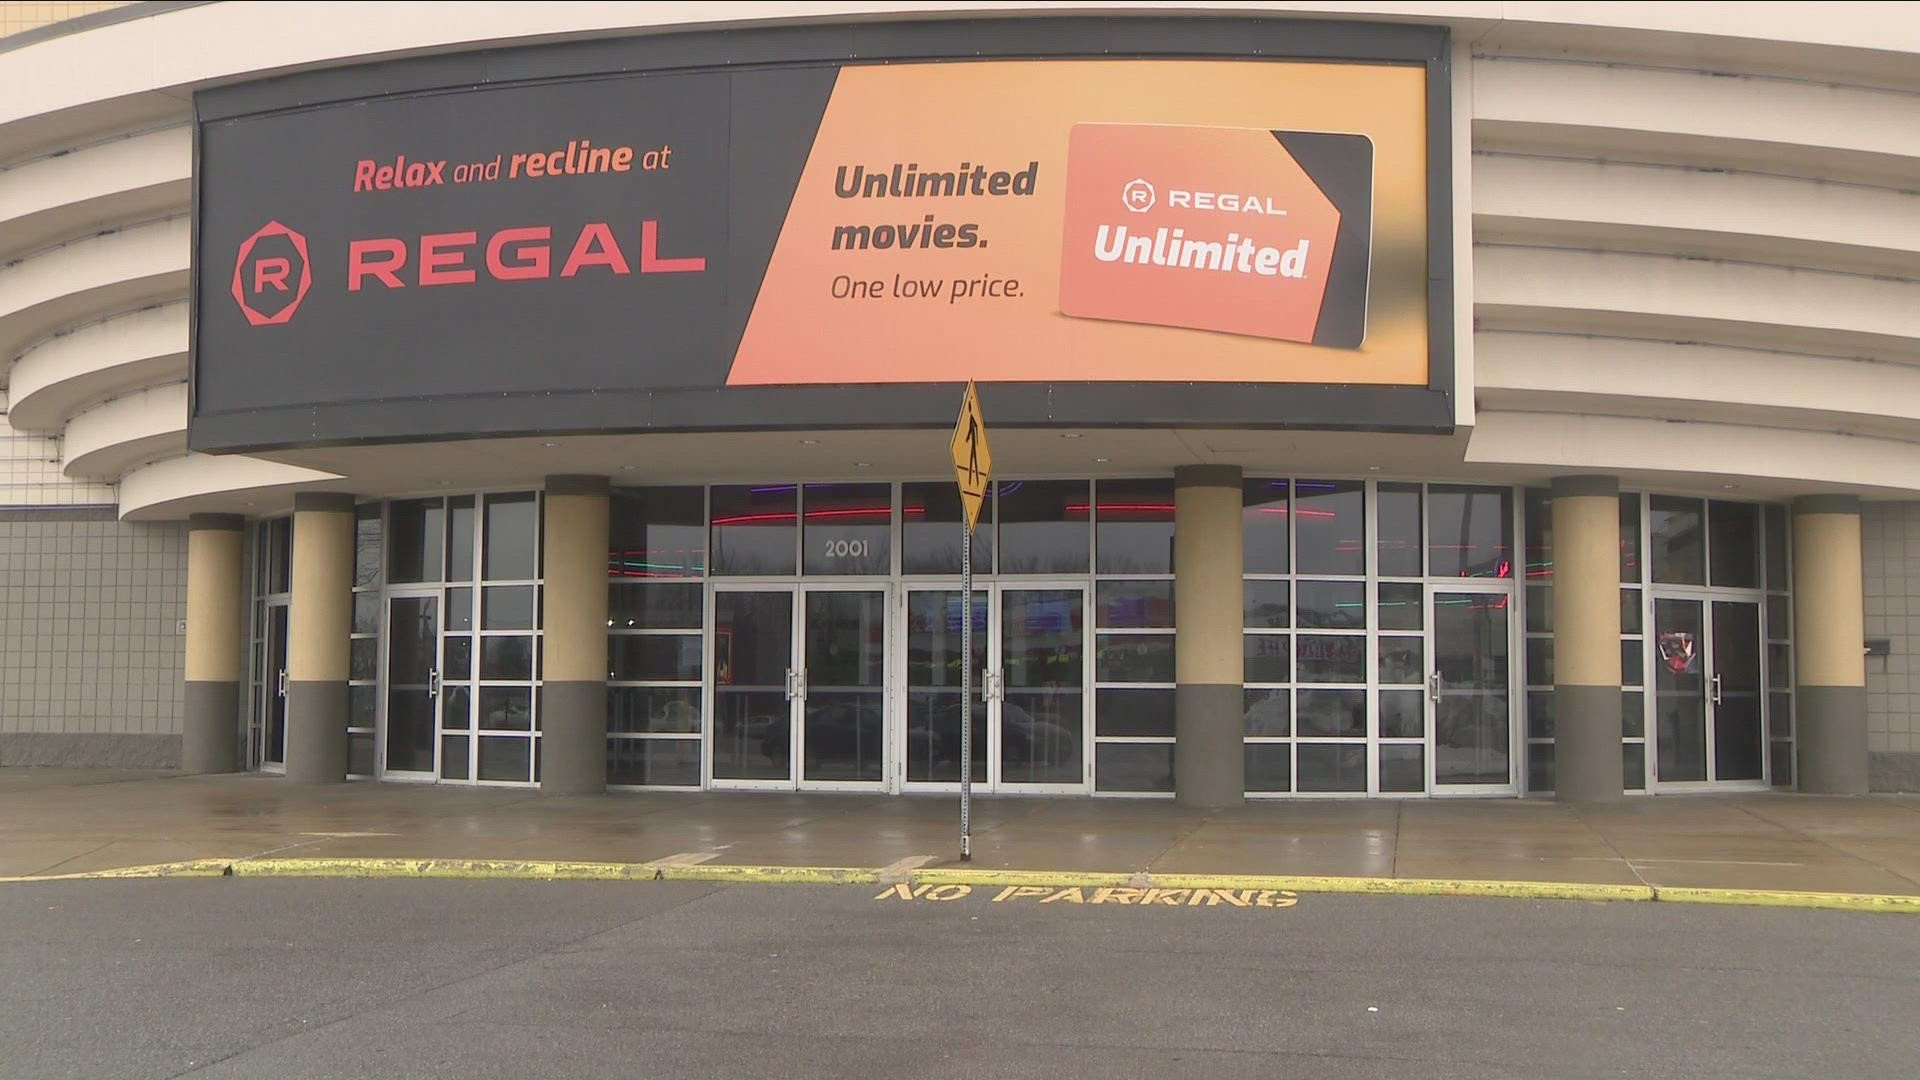 According to a film industry expert, Regal's parent company Cineworld could have filed for bankruptcy as a negotiating tactic with landlords.